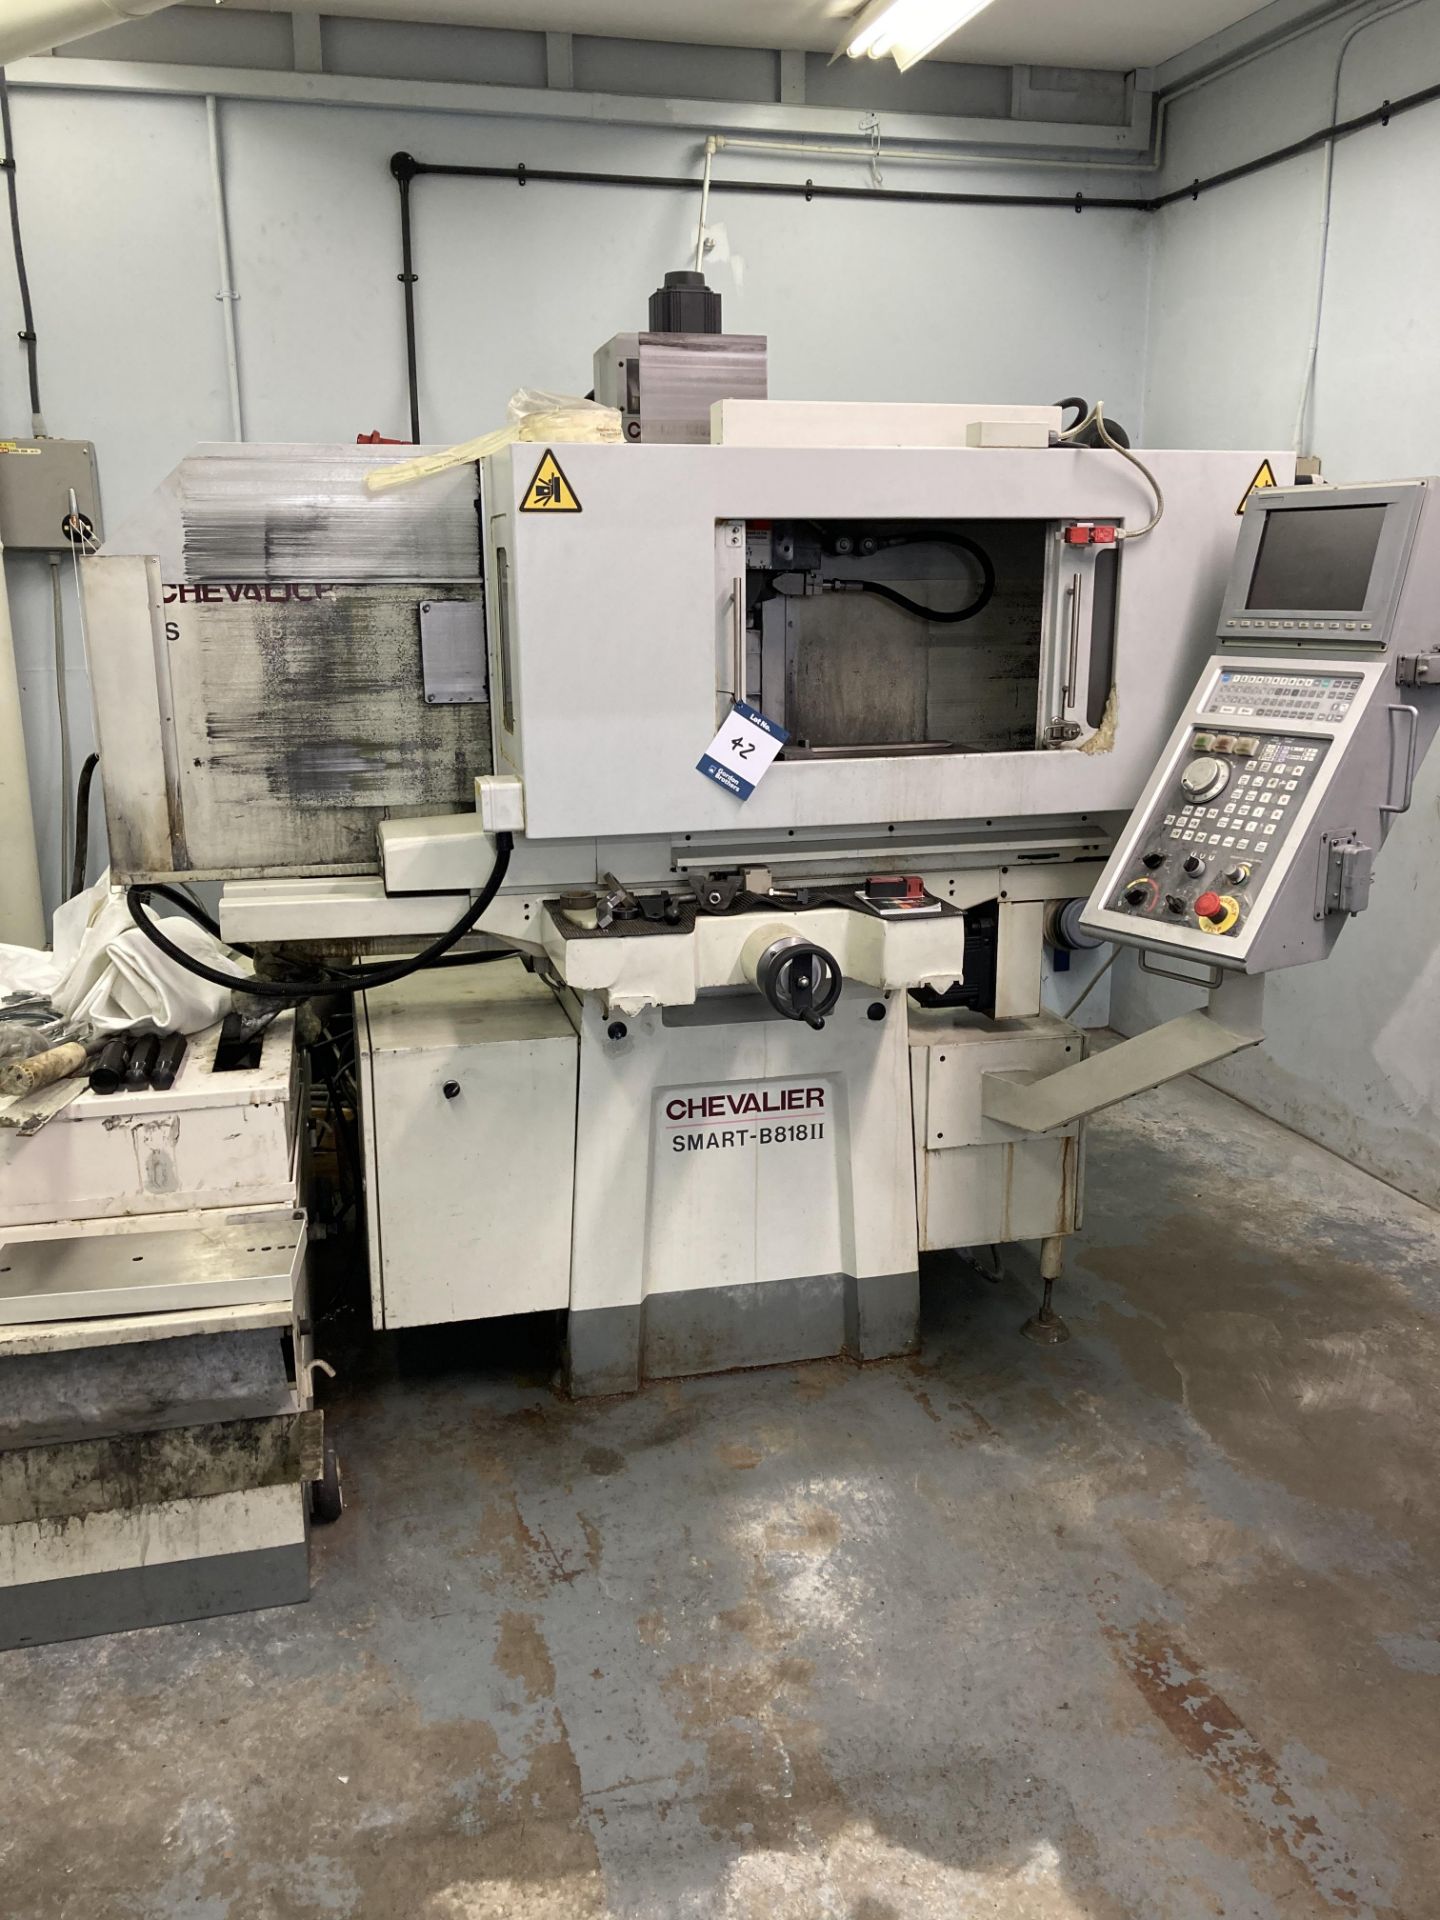 Chevalier Smart-B818II CNC horizontal surface grinder, Serial No. S794B001 (2008) with digital